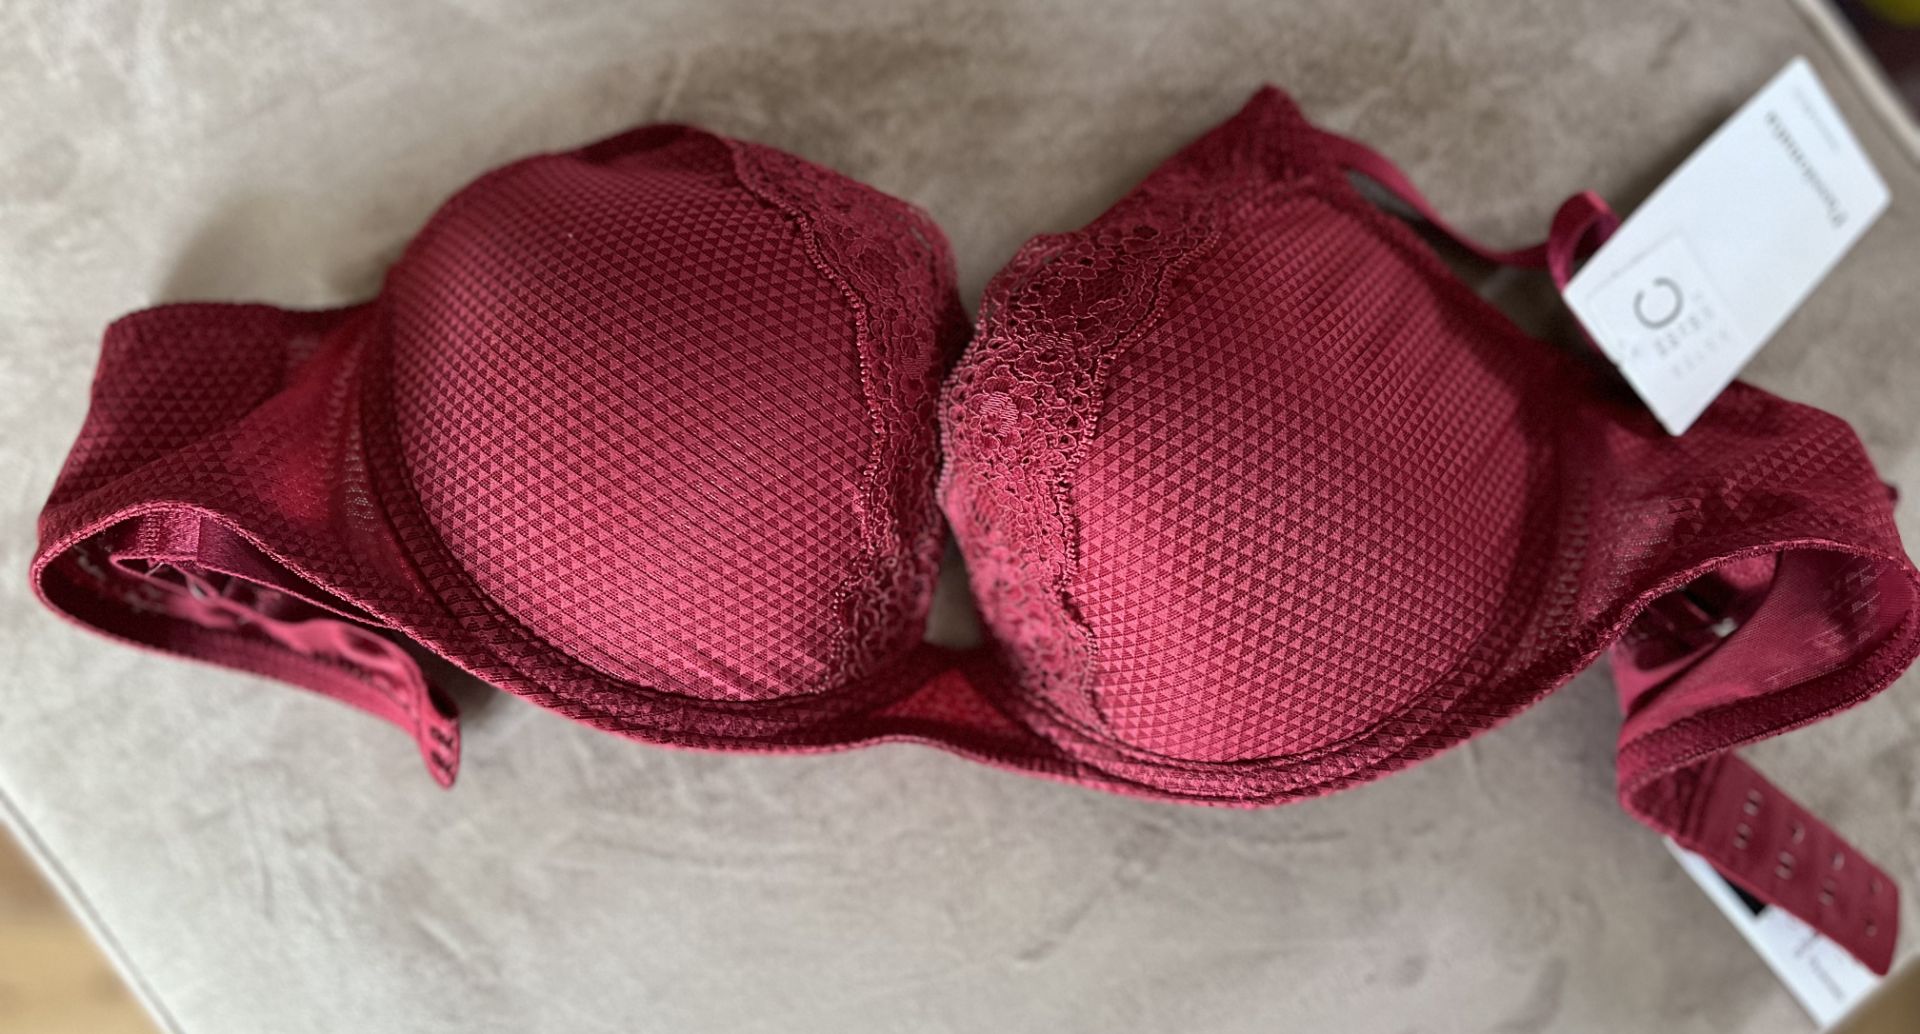 Three Boxes of Luxury High Quality French lingerie, Primarily Passionata and Valege. - Image 18 of 110